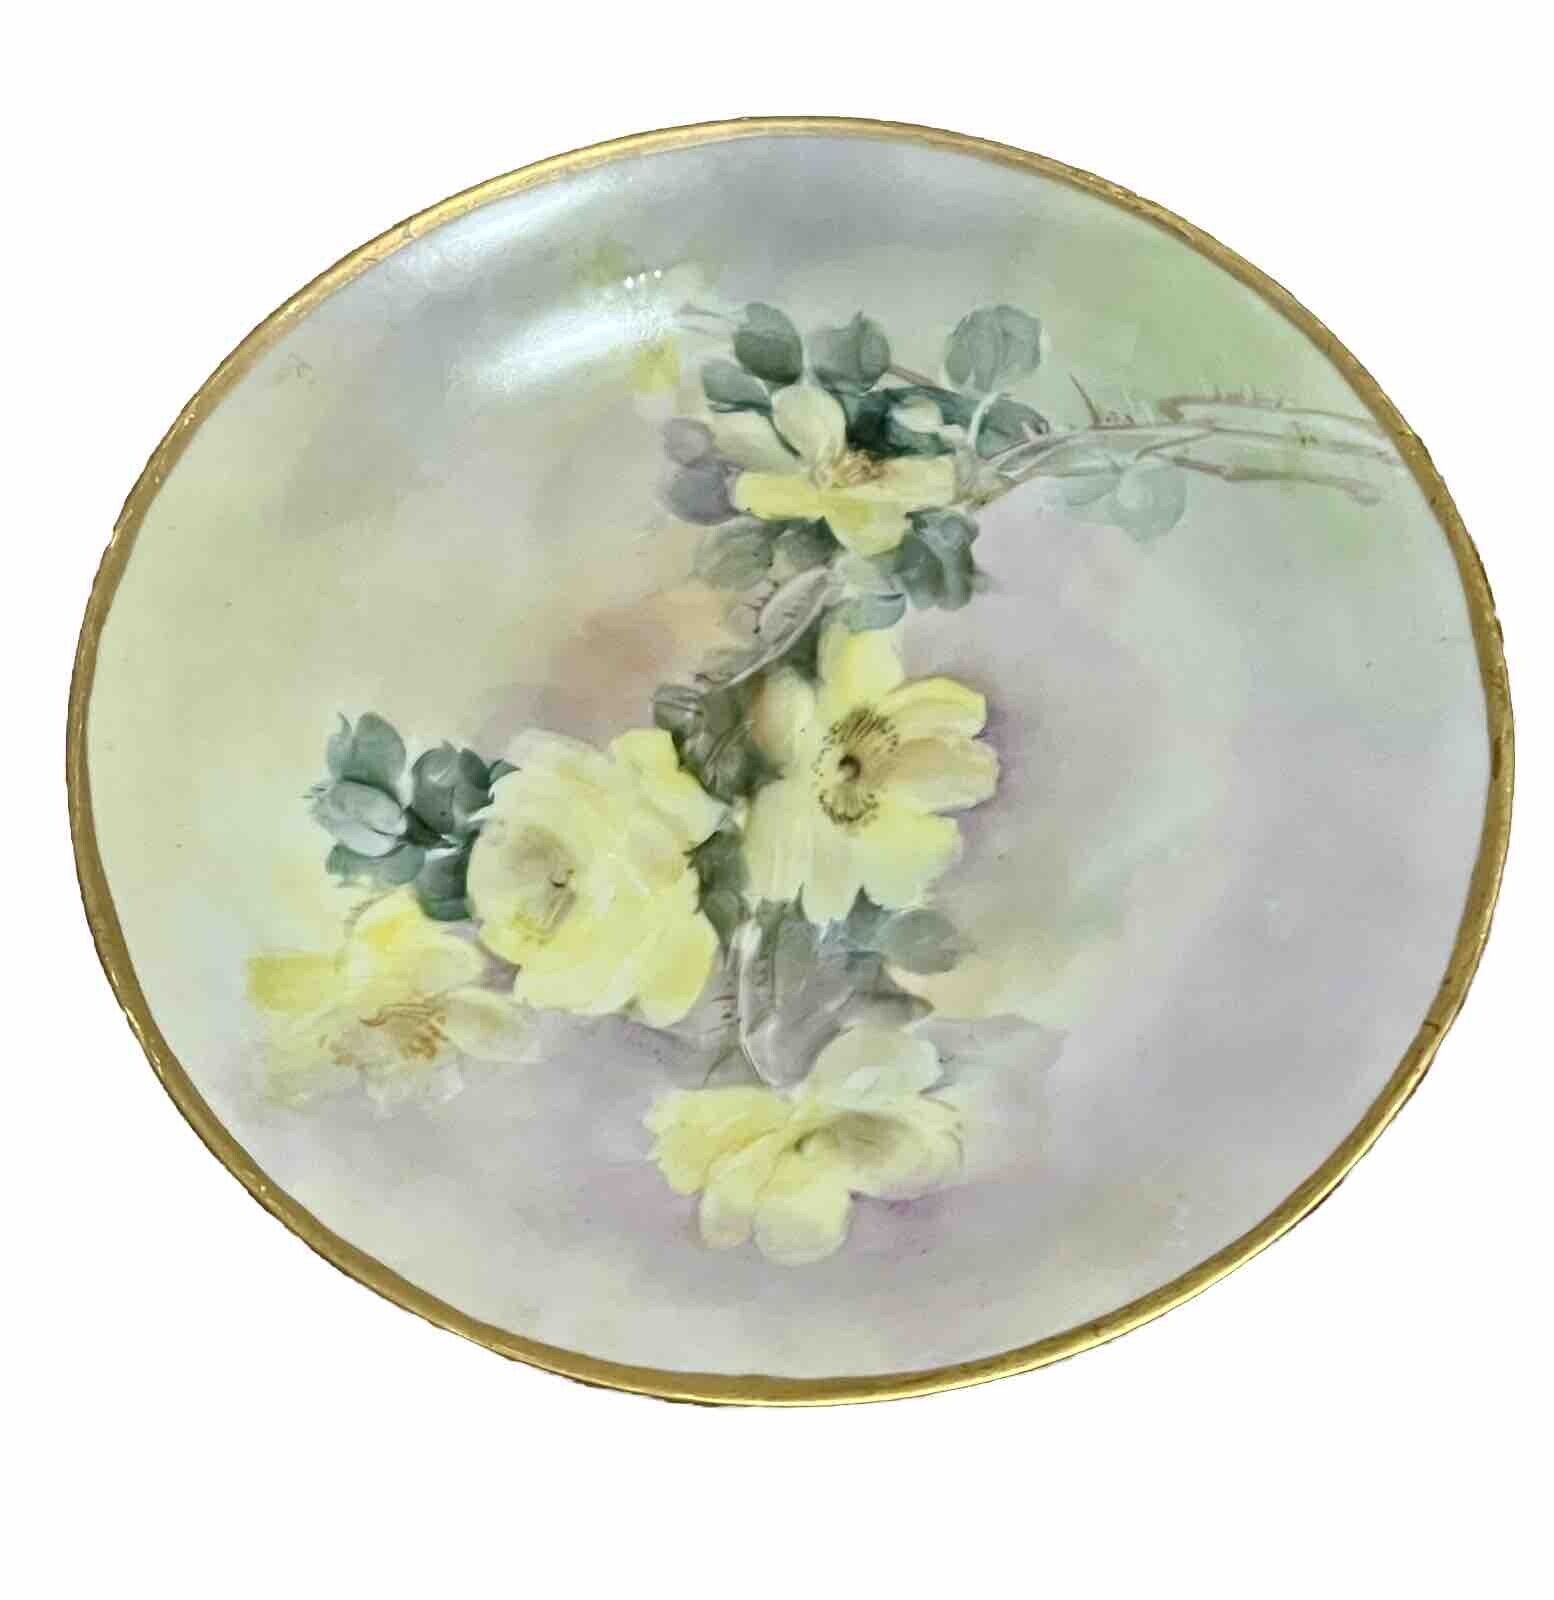 Vintage Limoges France Plate Signed Yellow Floral Plate 8.5”